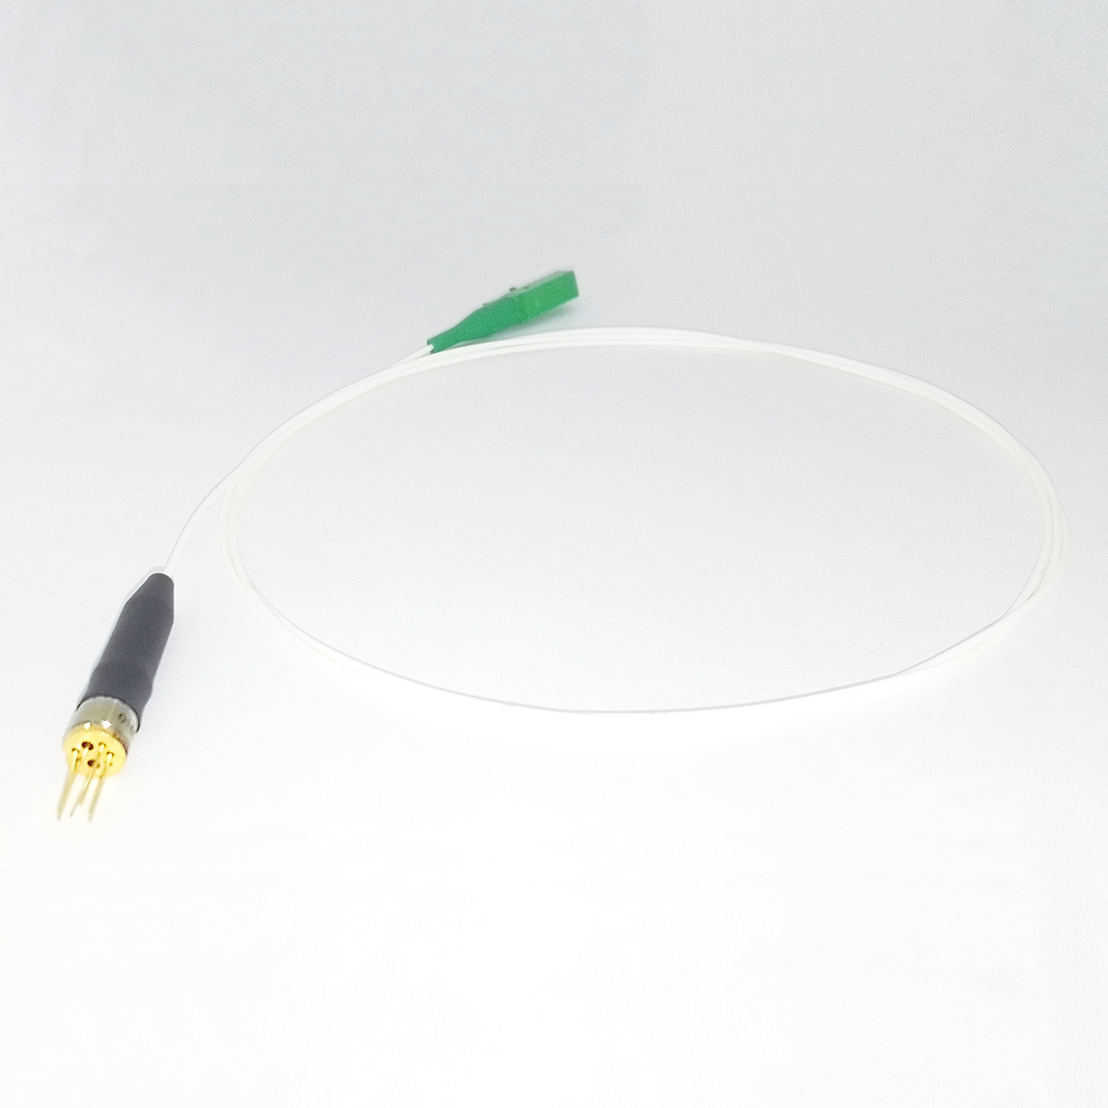 1060 nm Tunable VCSEL Pigtail TO with Isolator - Bandwidth 10